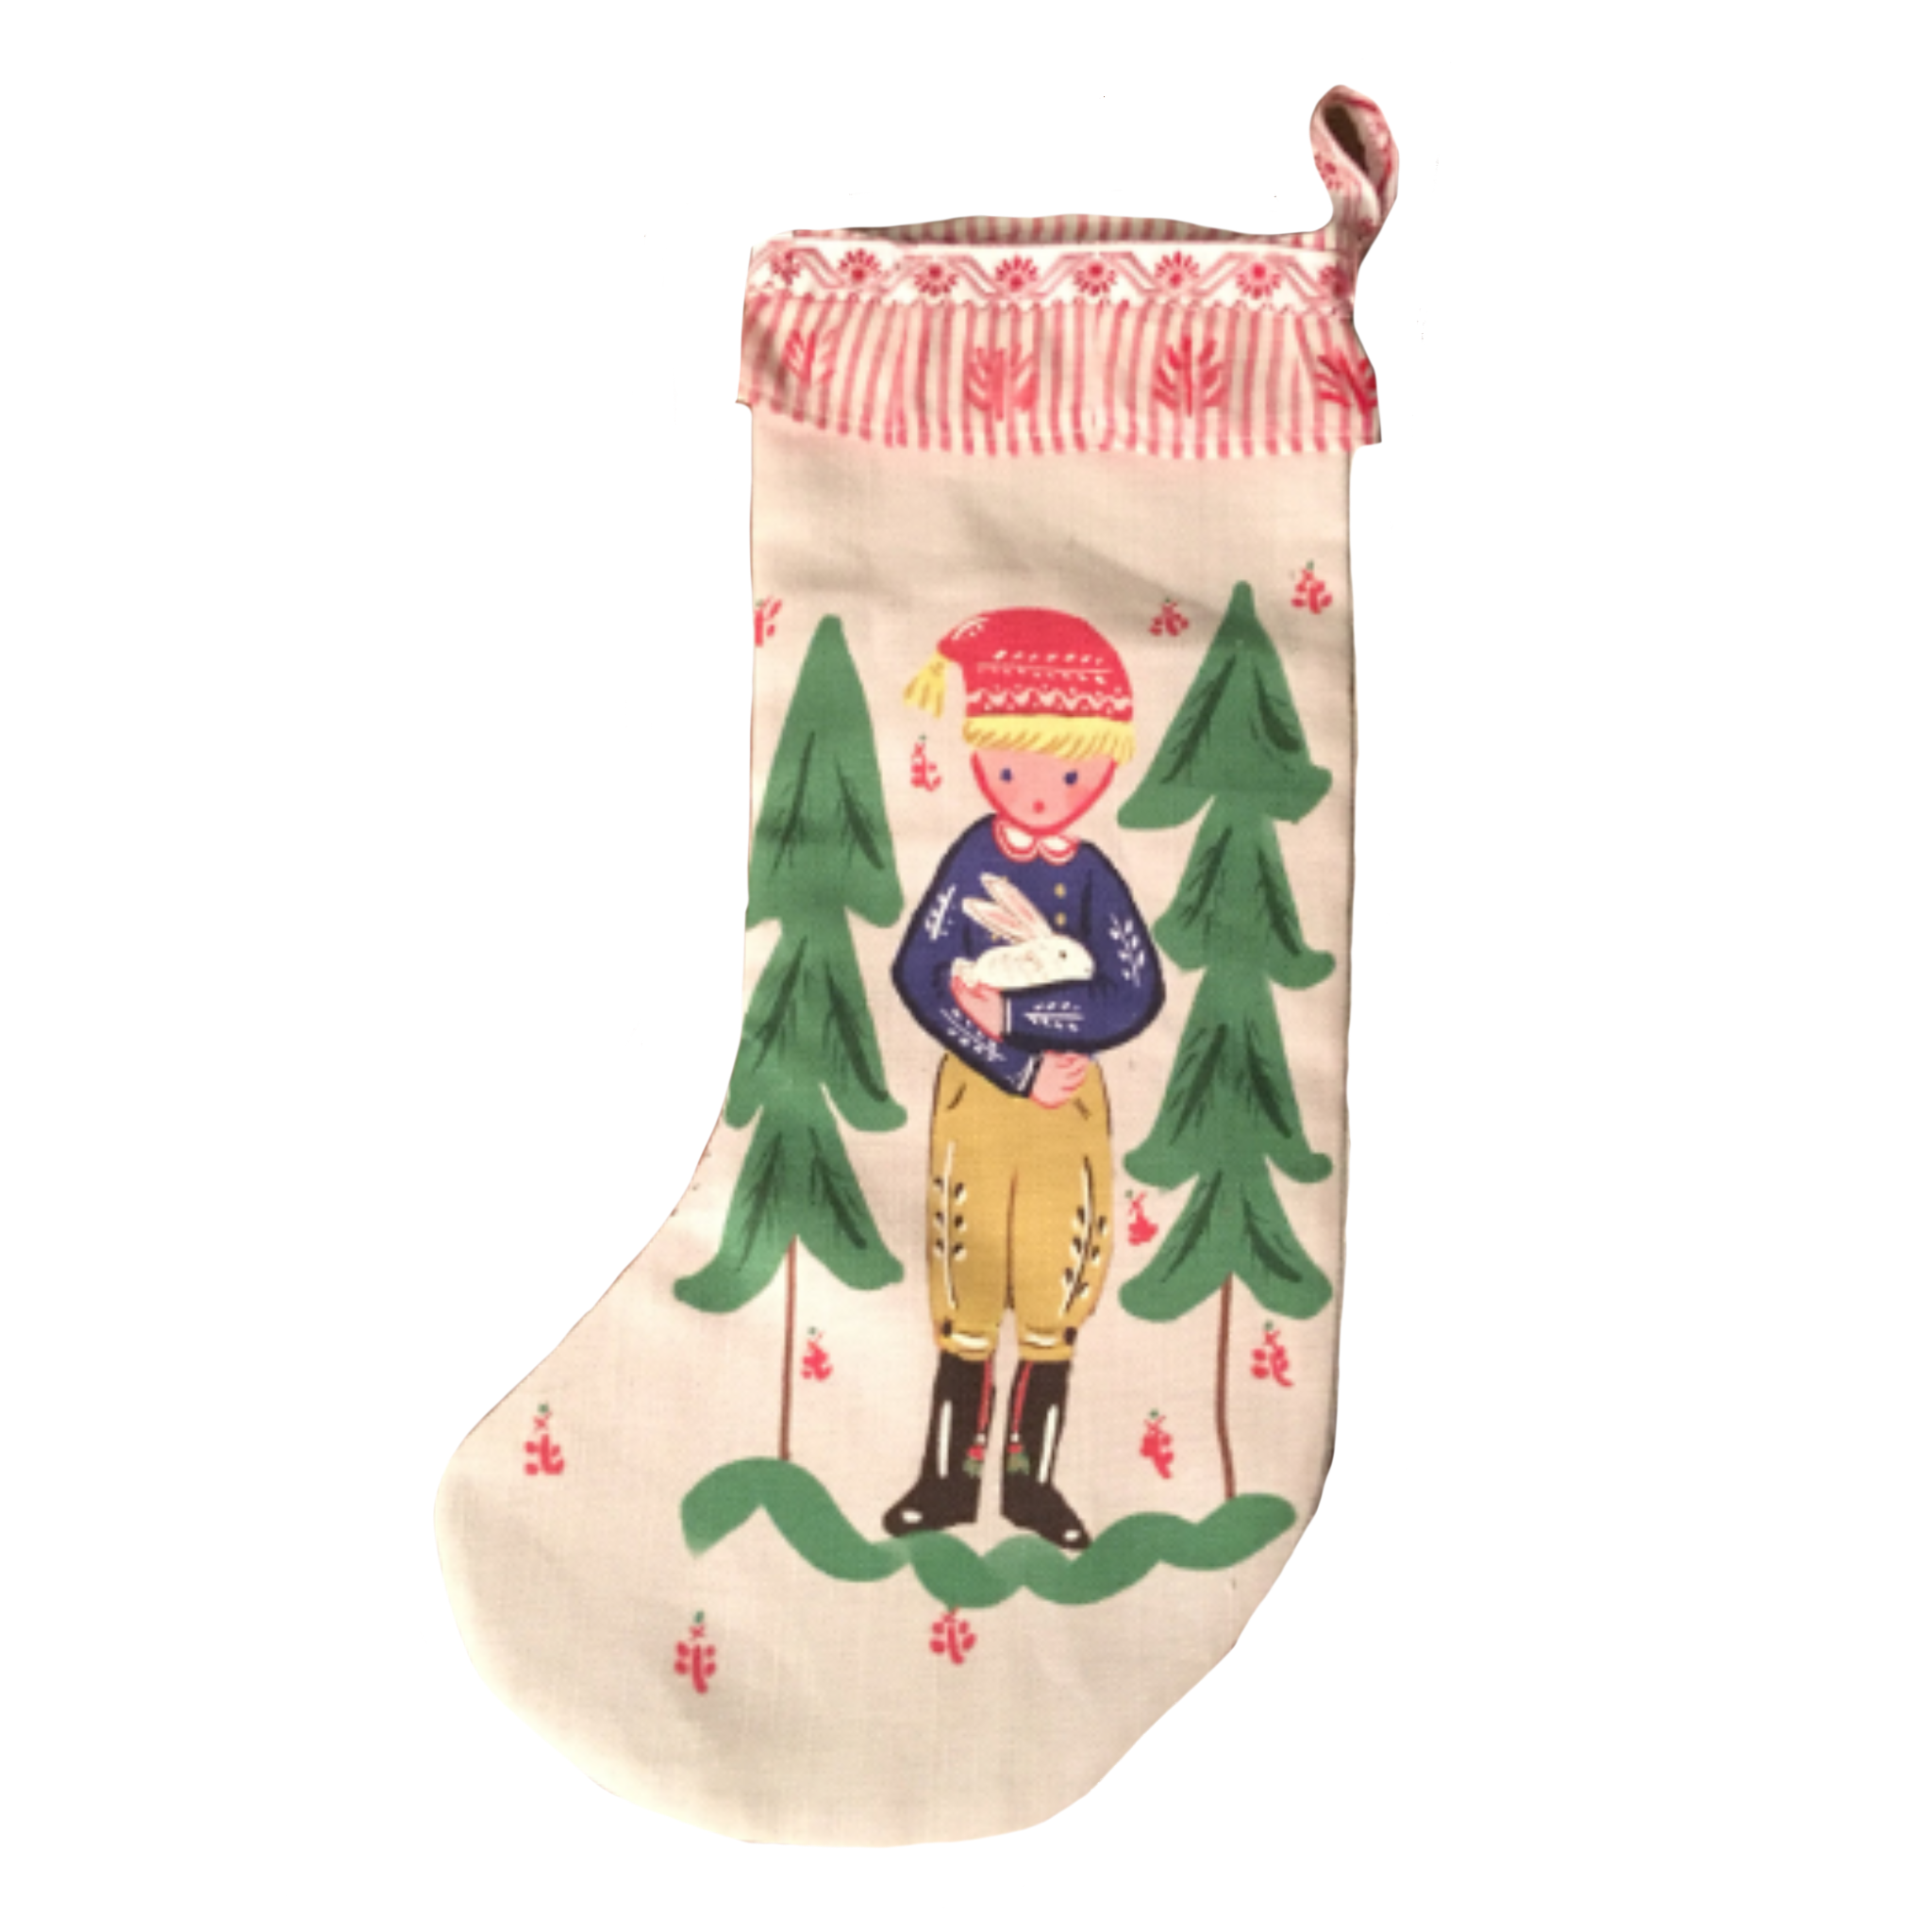 Stocking - Boy with Bunny and Trees - Tricia Lowenfield Design